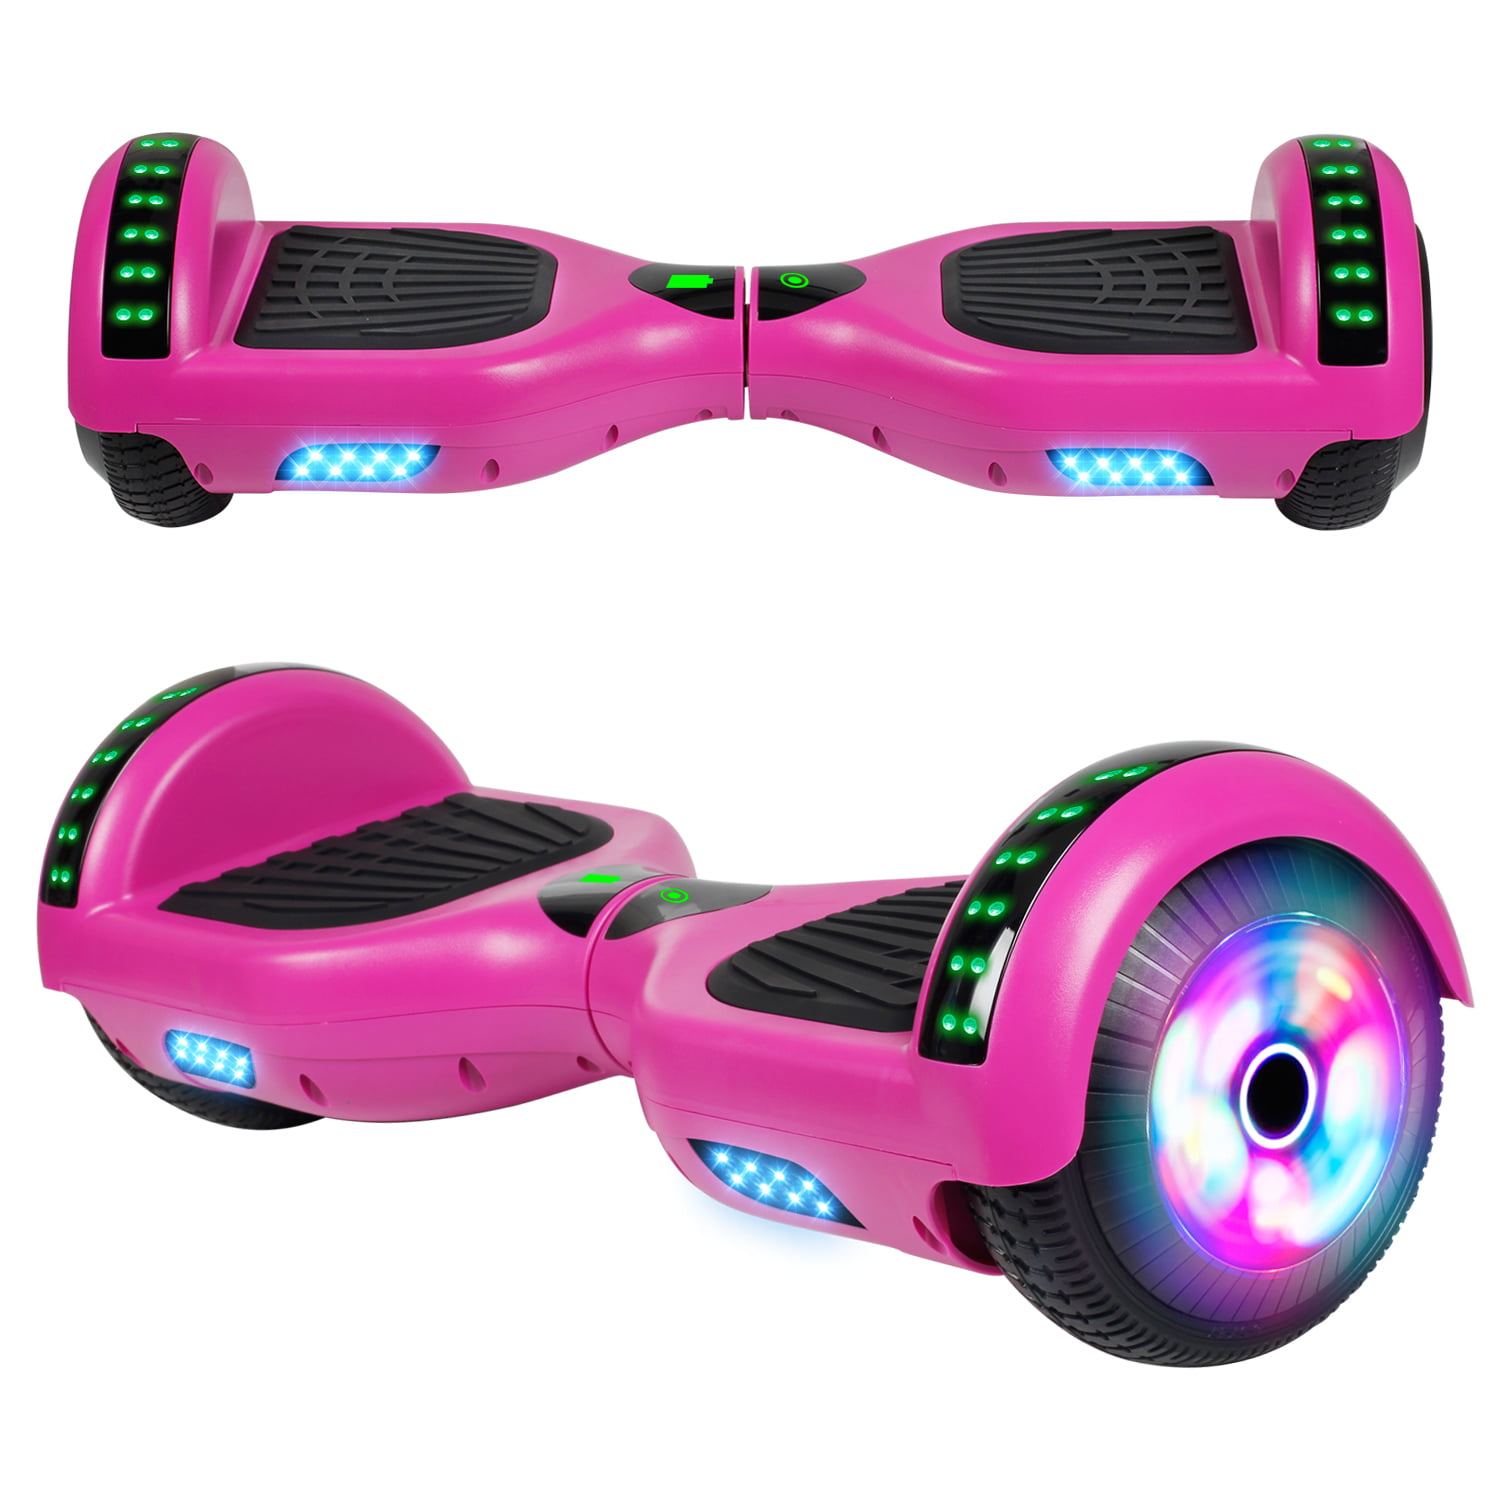 SISIGAD Hoverboard Self Balancing Scooter 6.5 Two-Wheel Self Balancing Hoverboard with Bluetooth Speaker and LED Lights Electric Scooter for Adult Kids Gift UL 2272 Certified Pure Color Series 